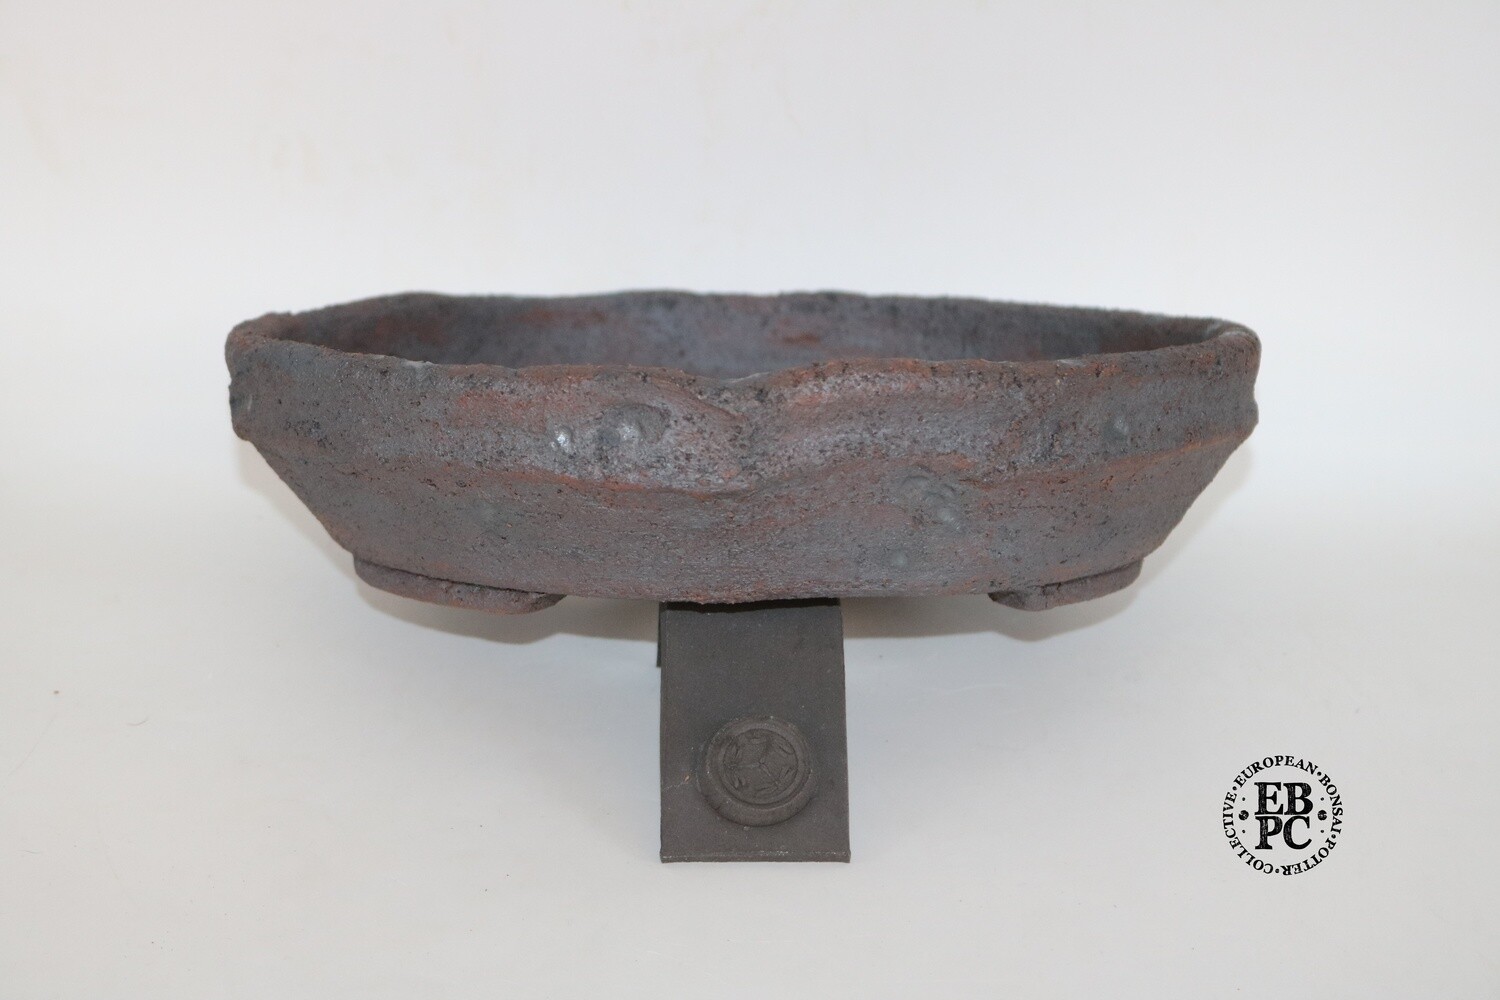 Dragonfly Bonsai Pots. 29.2cm; Unglazed; Round; Nanban; Manipulated form; Grey Browns; Rugged Textures; Aged Finish